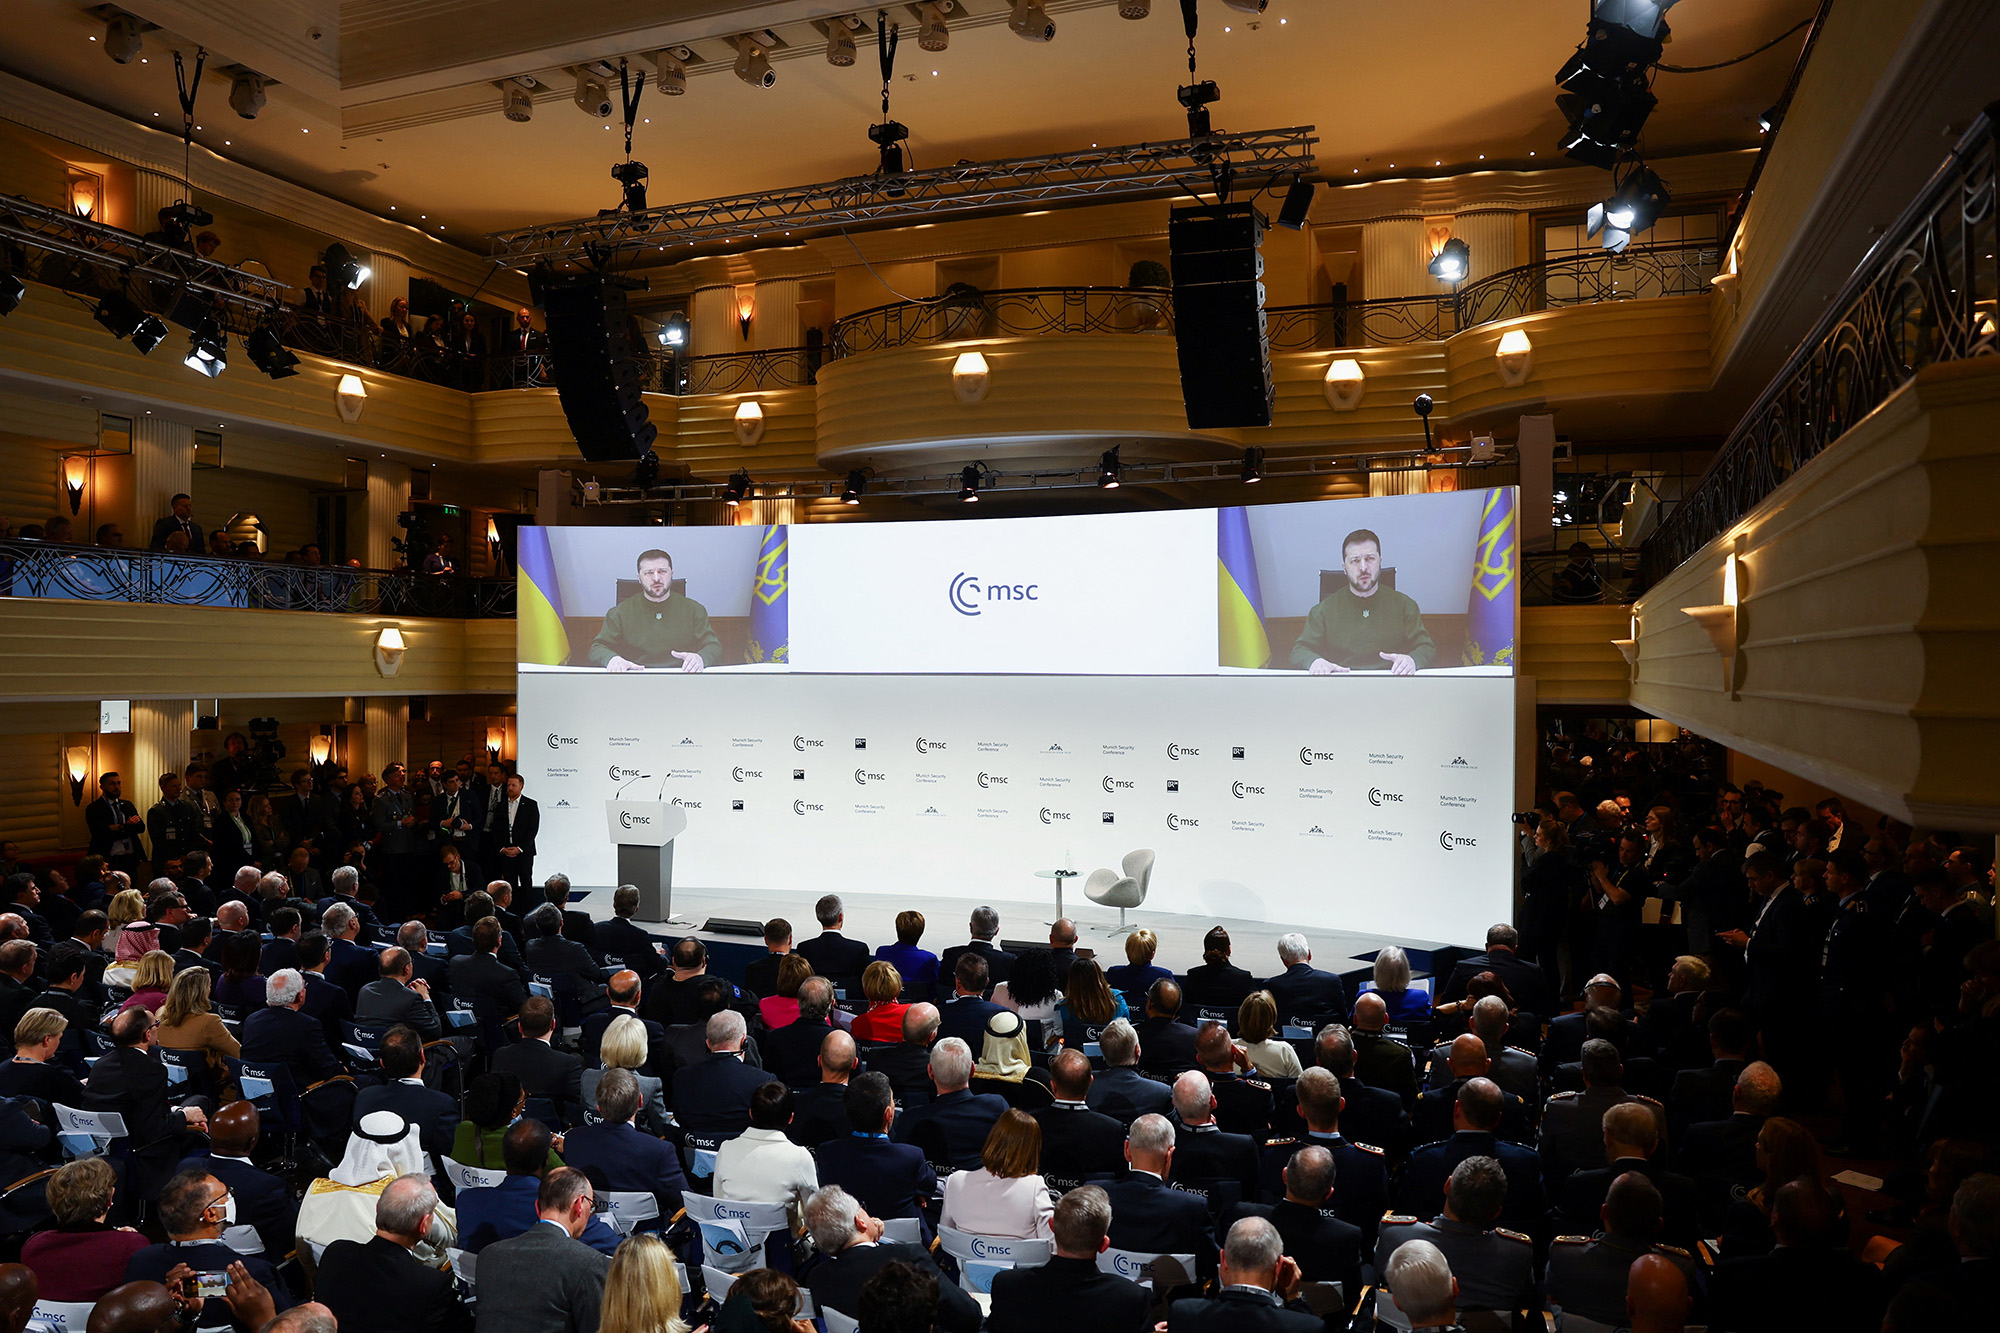 Ukrainian President Volodymyr Zelensky appears on the screen during the Munich Security Conference, in Munich, Germany, on February 17.